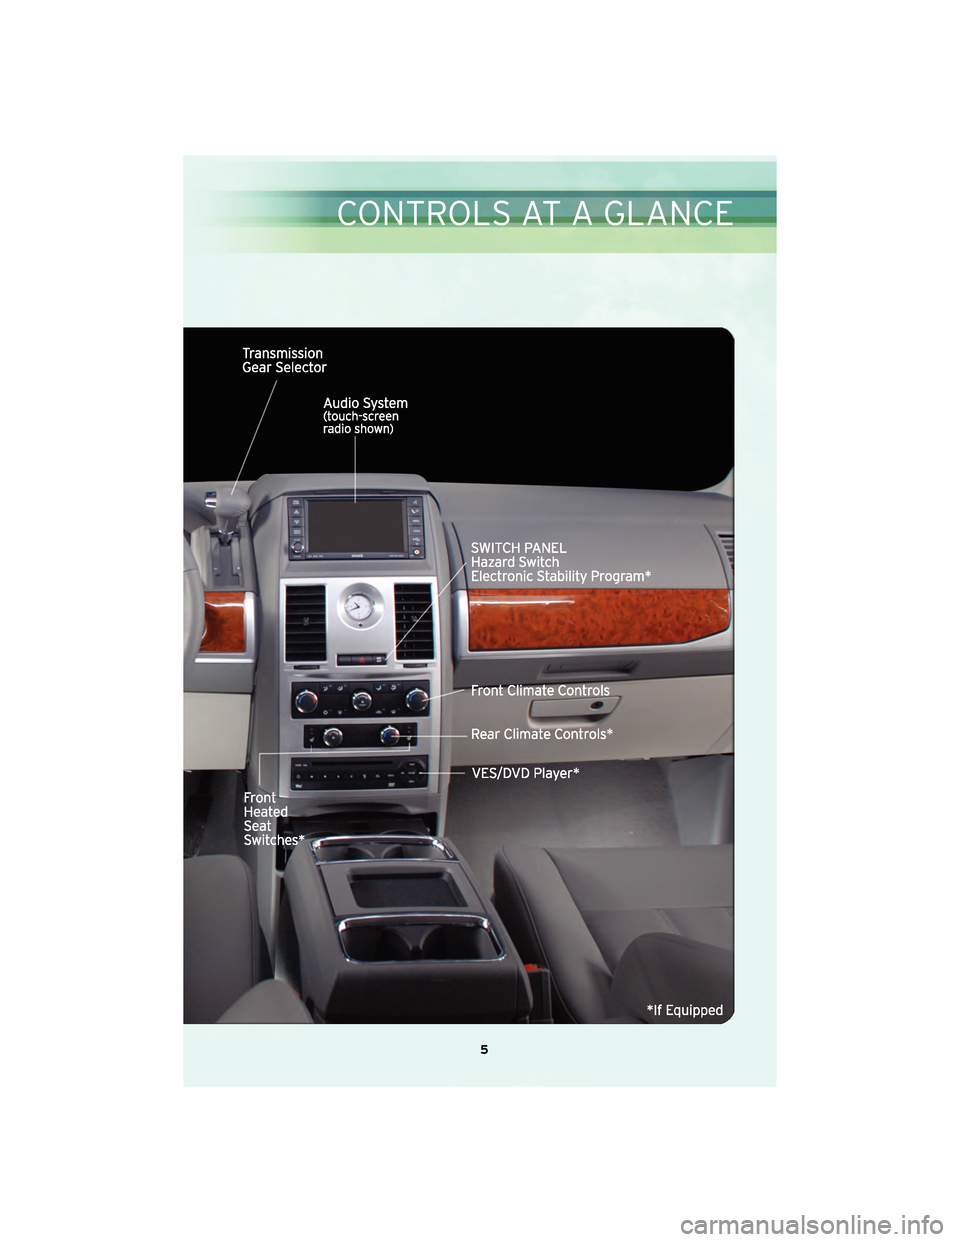 CHRYSLER TOWN AND COUNTRY 2010 5.G User Guide 5
CONTROLS AT A GLANCE 